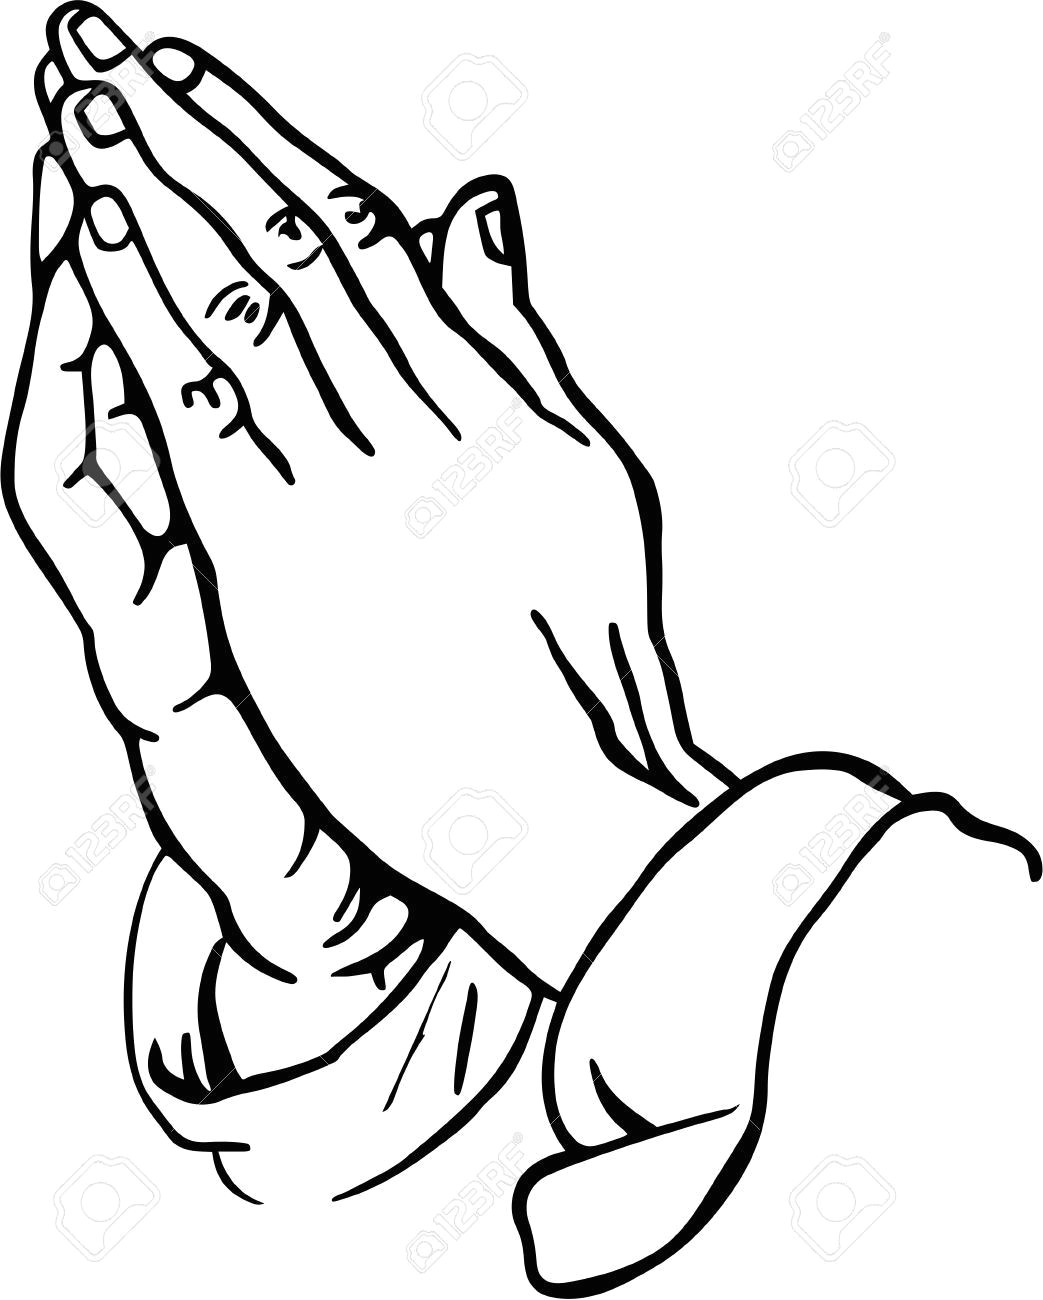 Drawing Of Namaste Hands Praying Hands Clipart Stock Photo Picture and Royalty Free Image